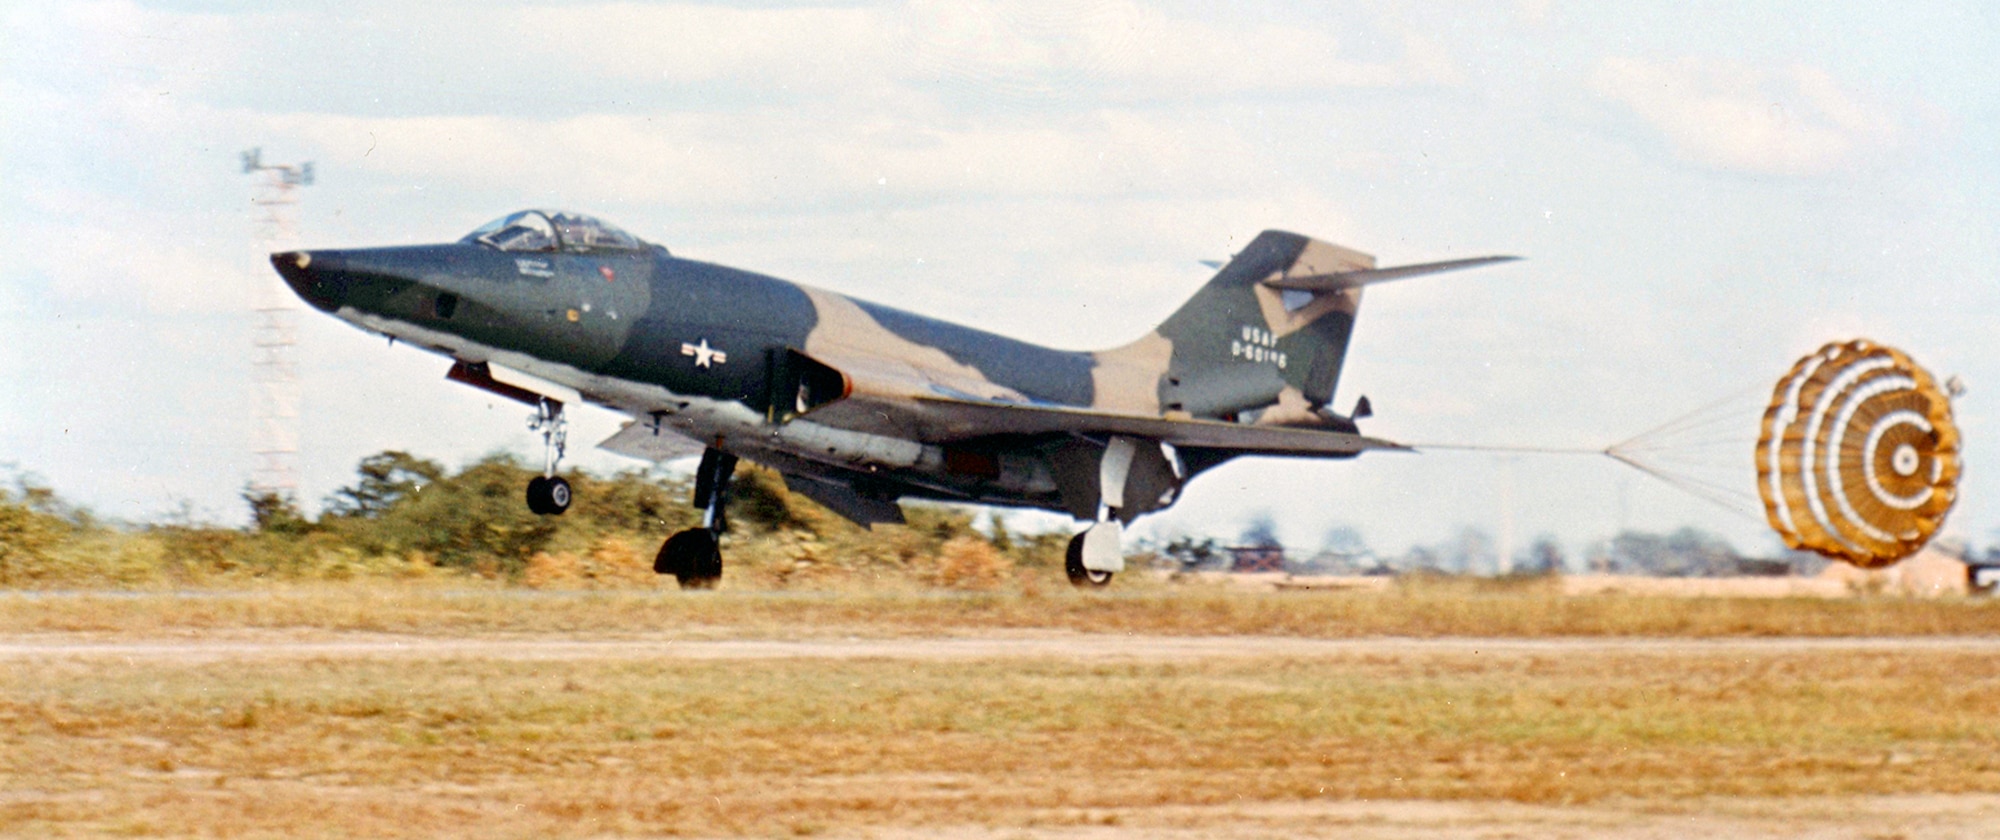 RF-101C pilot deploying the braking parachute upon landing after a mission over North Vietnam in 1967. Flights over North Vietnam were especially hazardous, and many aircraft were shot down. (U.S. Air Force photo)